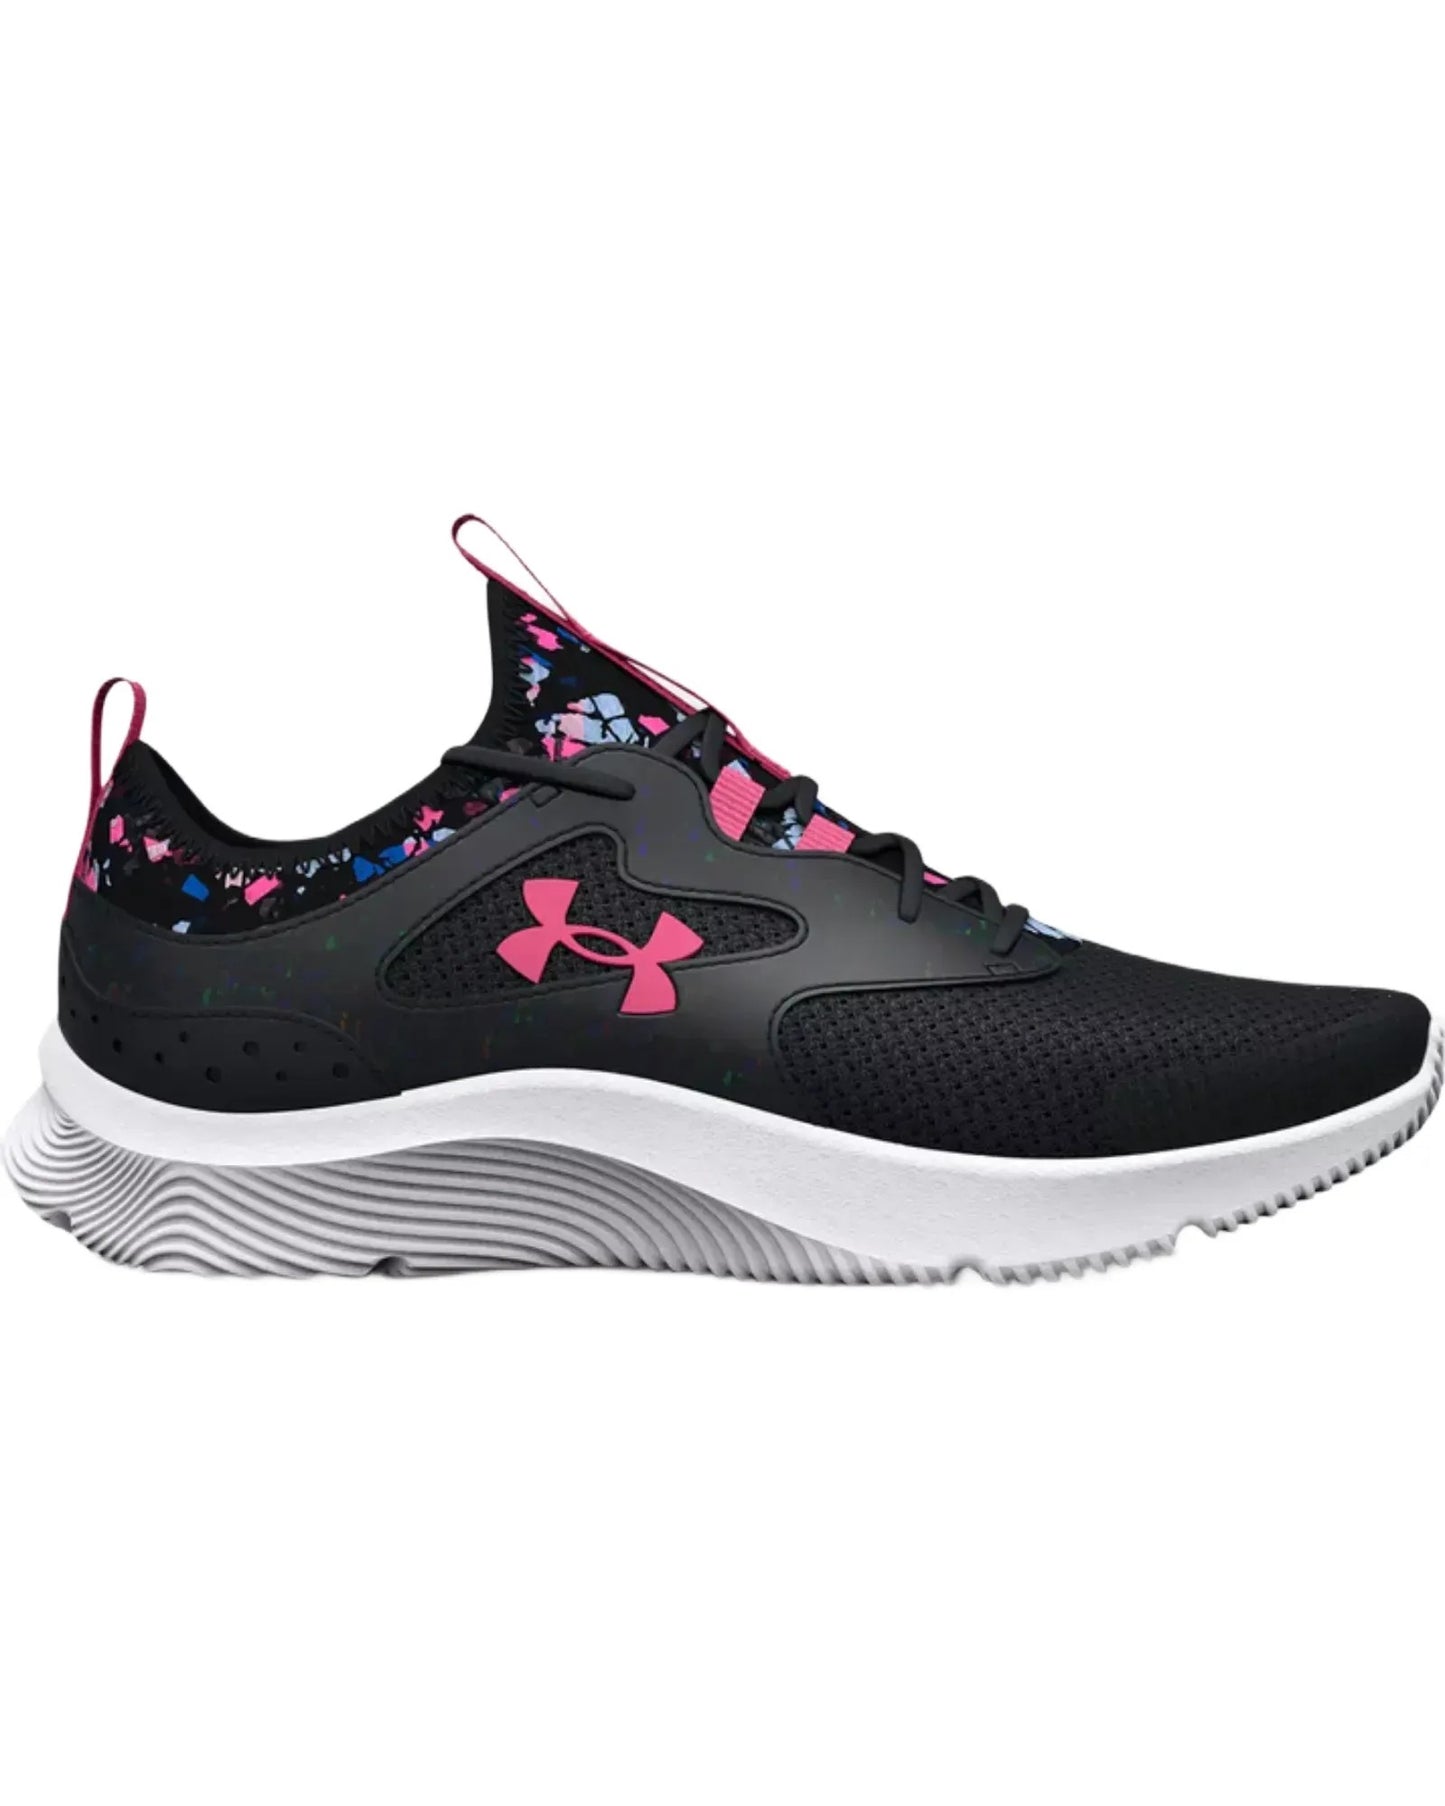 Chaussures de course GGS Infinity 2.0 - Under Armour